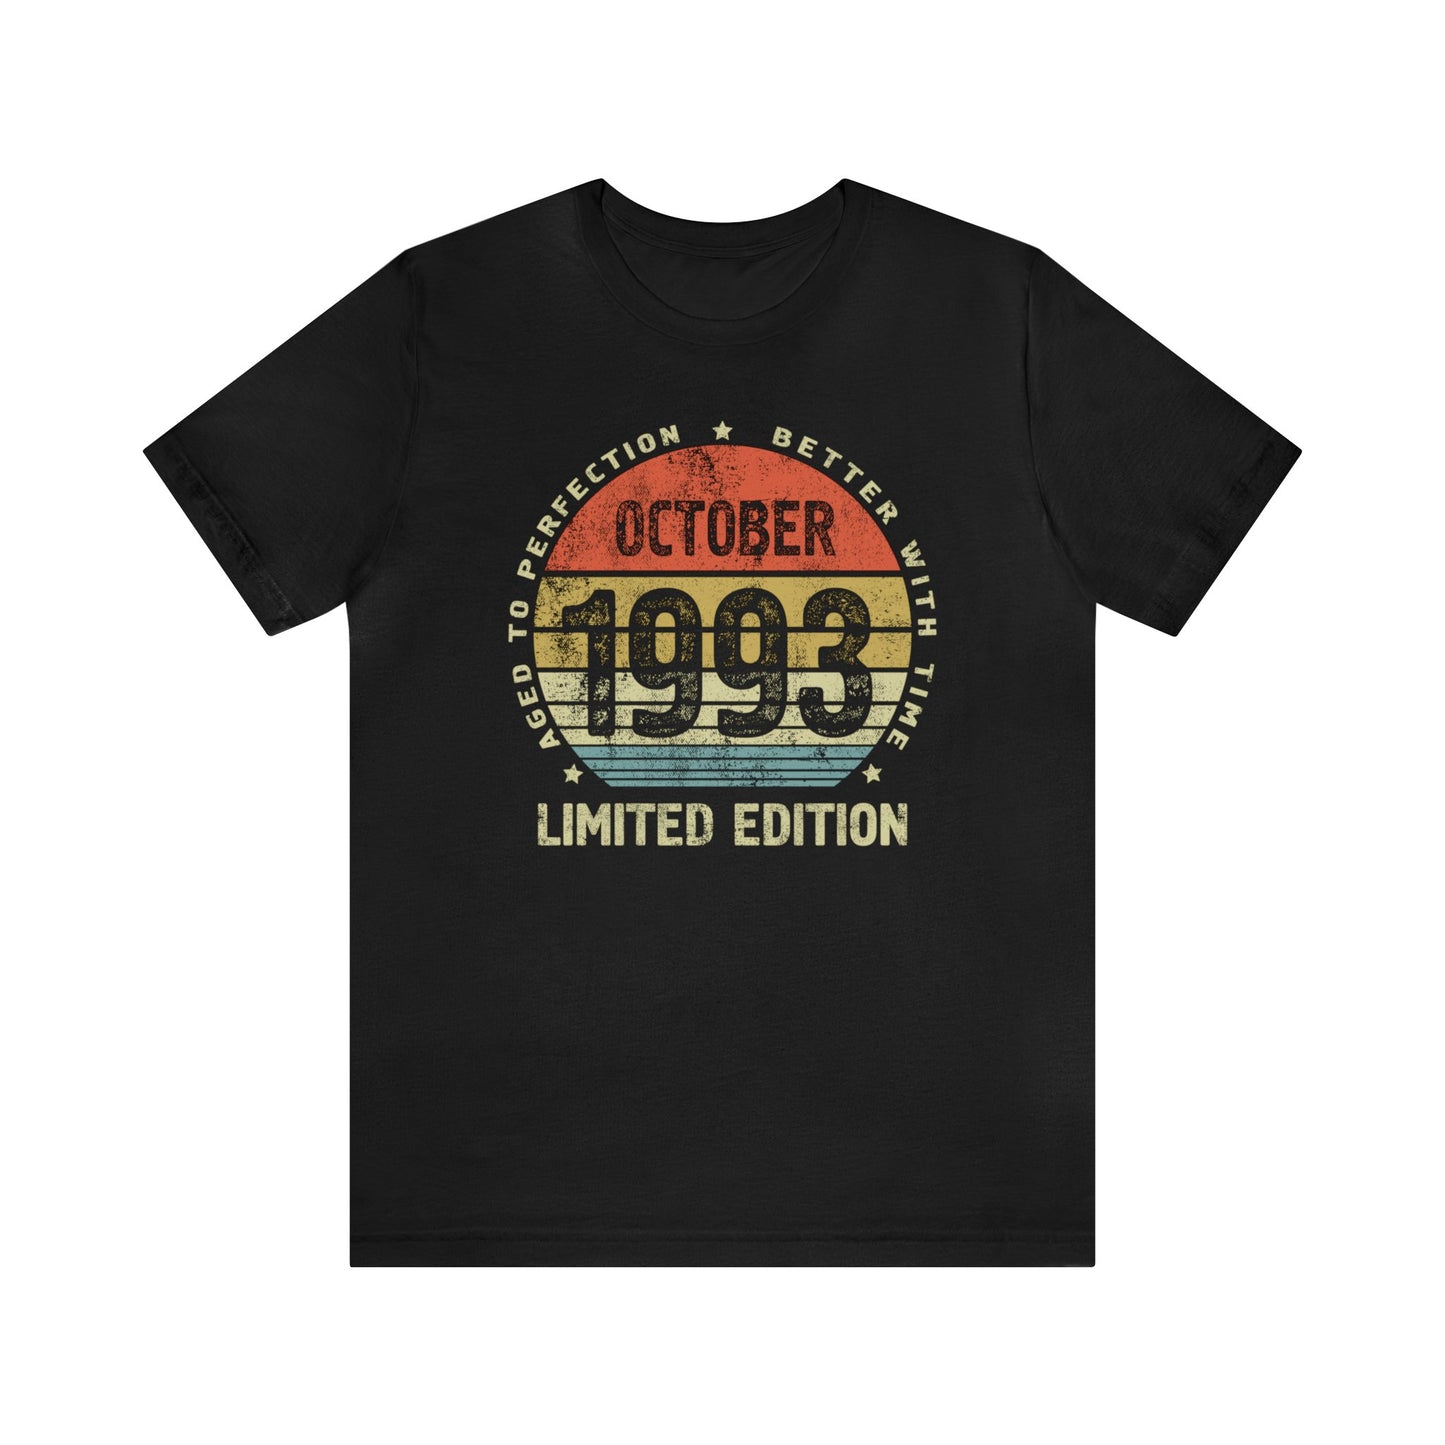 30th birthday gift for women or men October 1993 birthday shirt for sister or brother